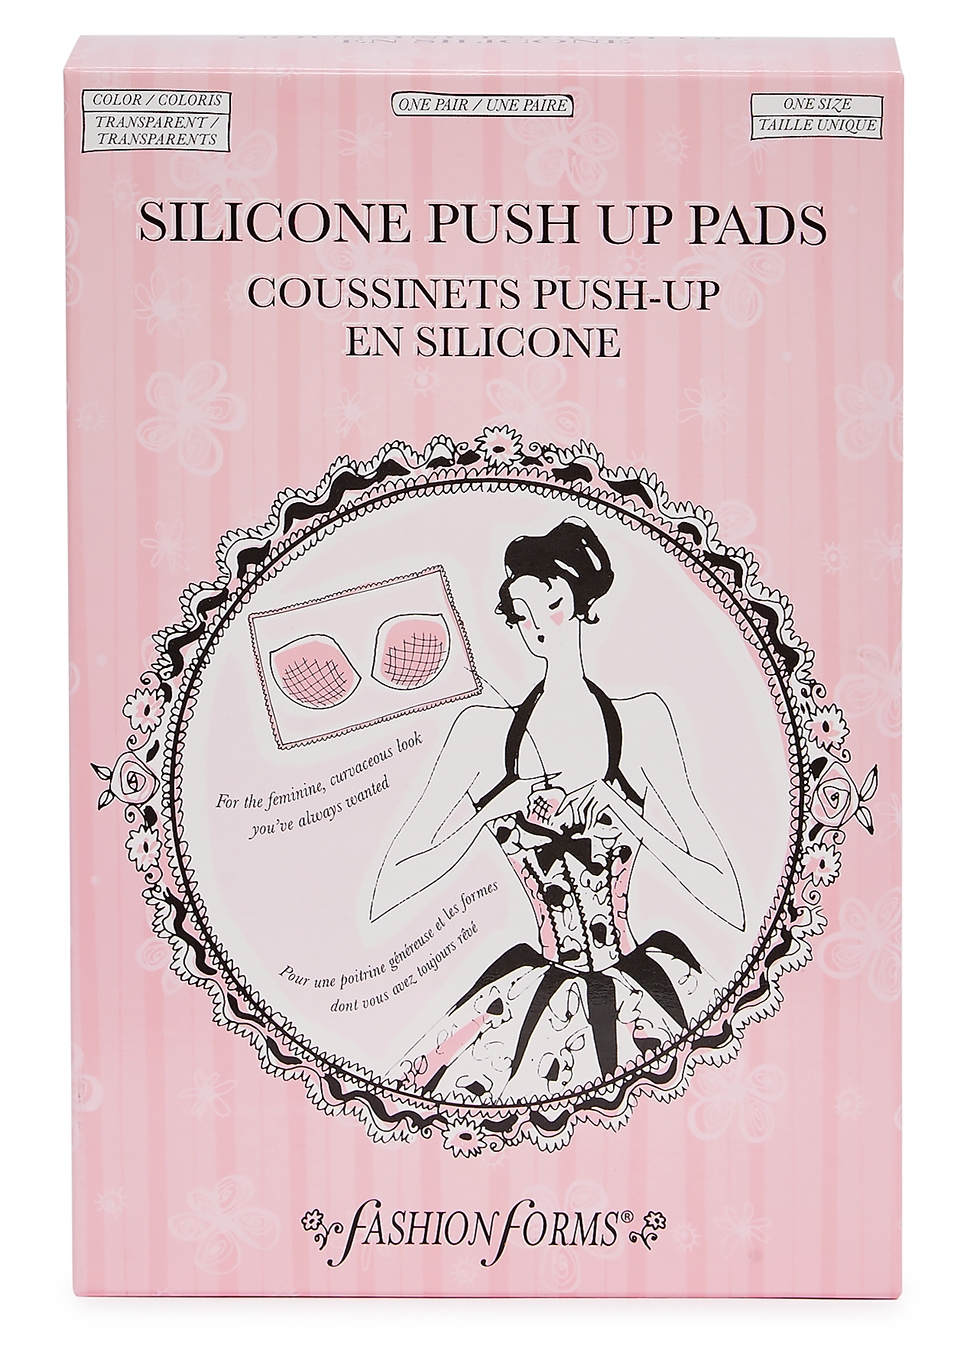 Silicone push-up pads - one pair